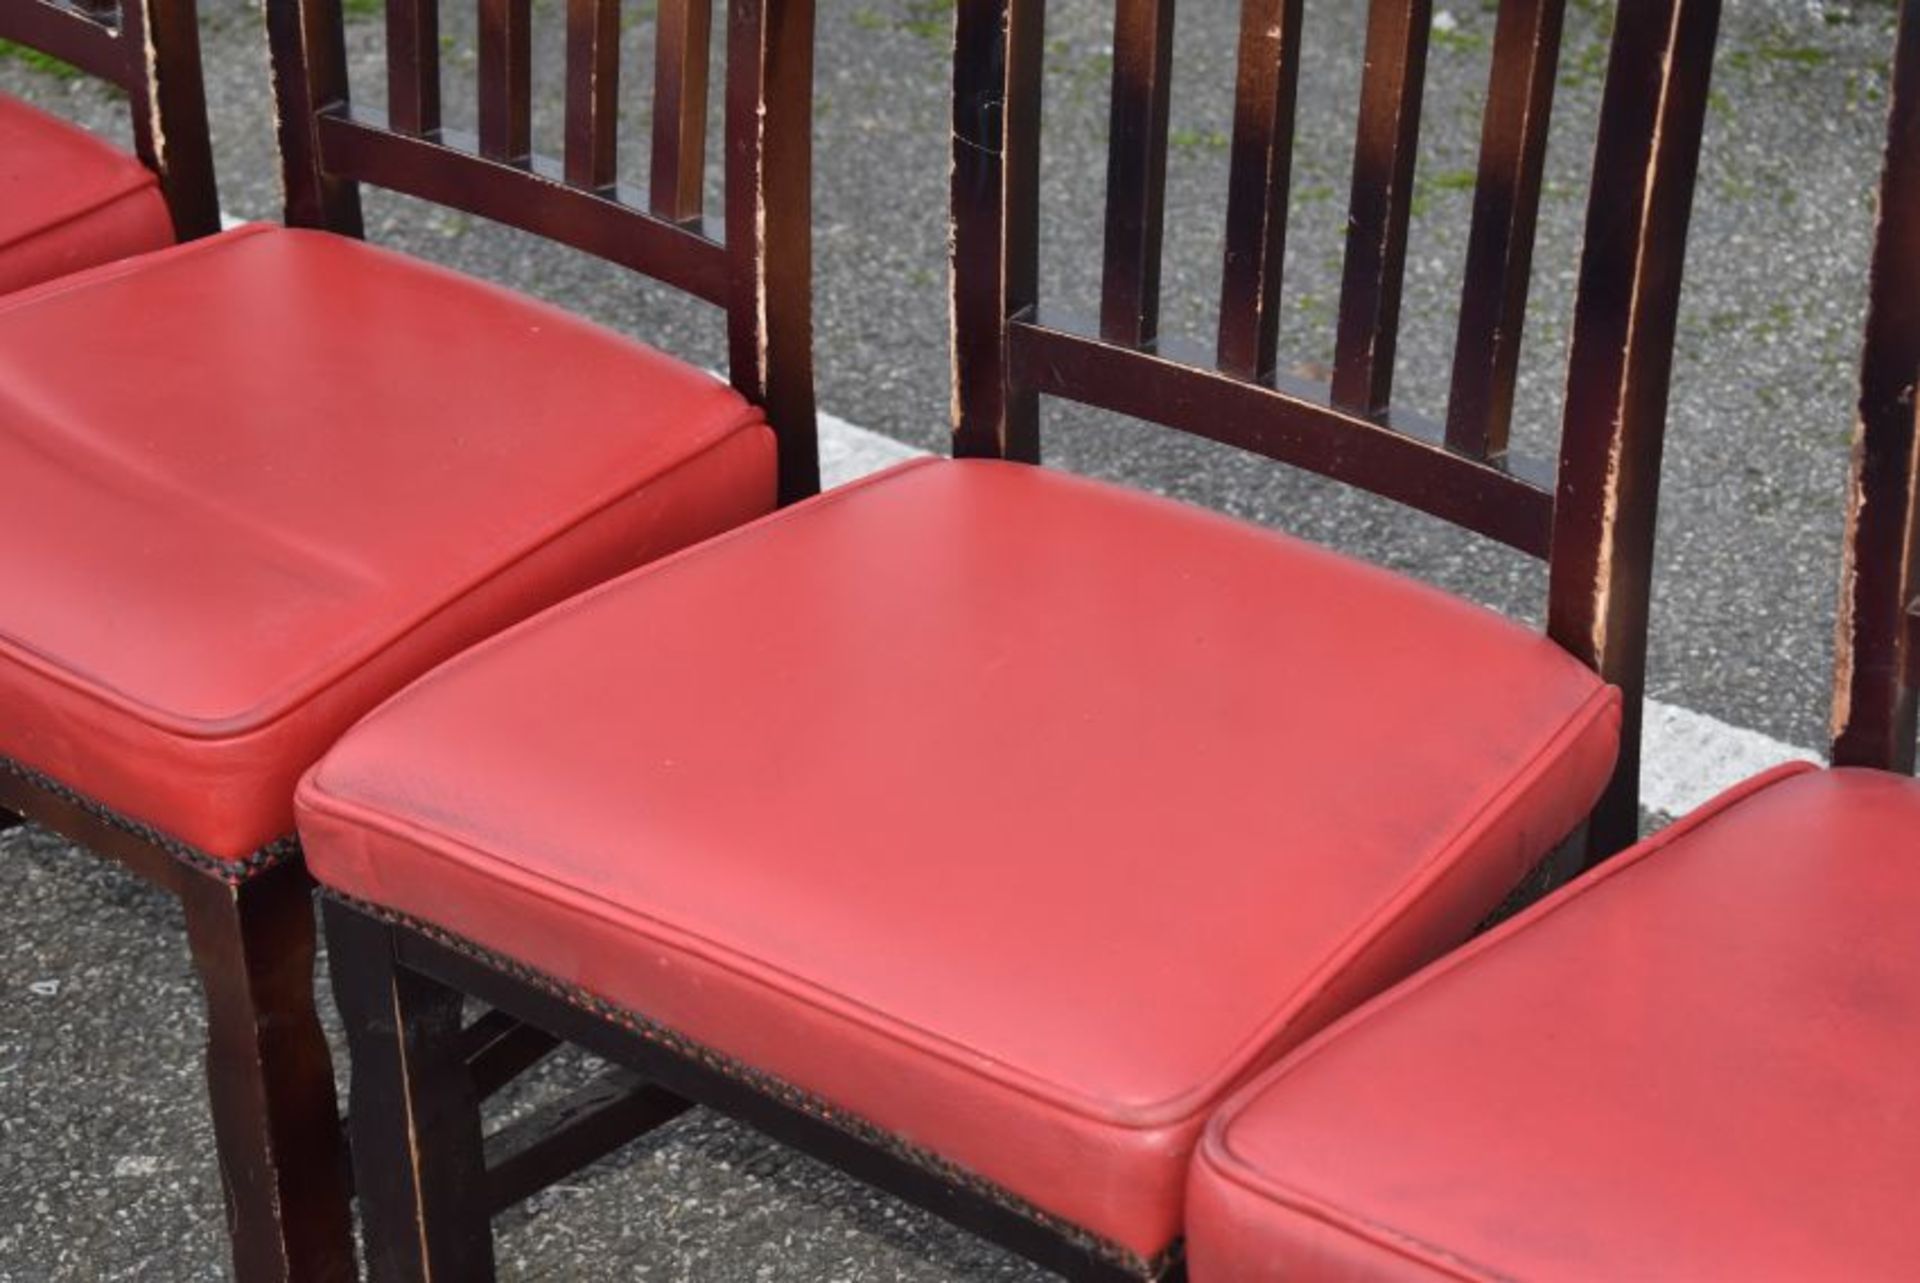 8 x Restaurant Dining Chairs With Dark Stained Wood Finish and Red Leather Seat Pads - Recently - Image 5 of 6